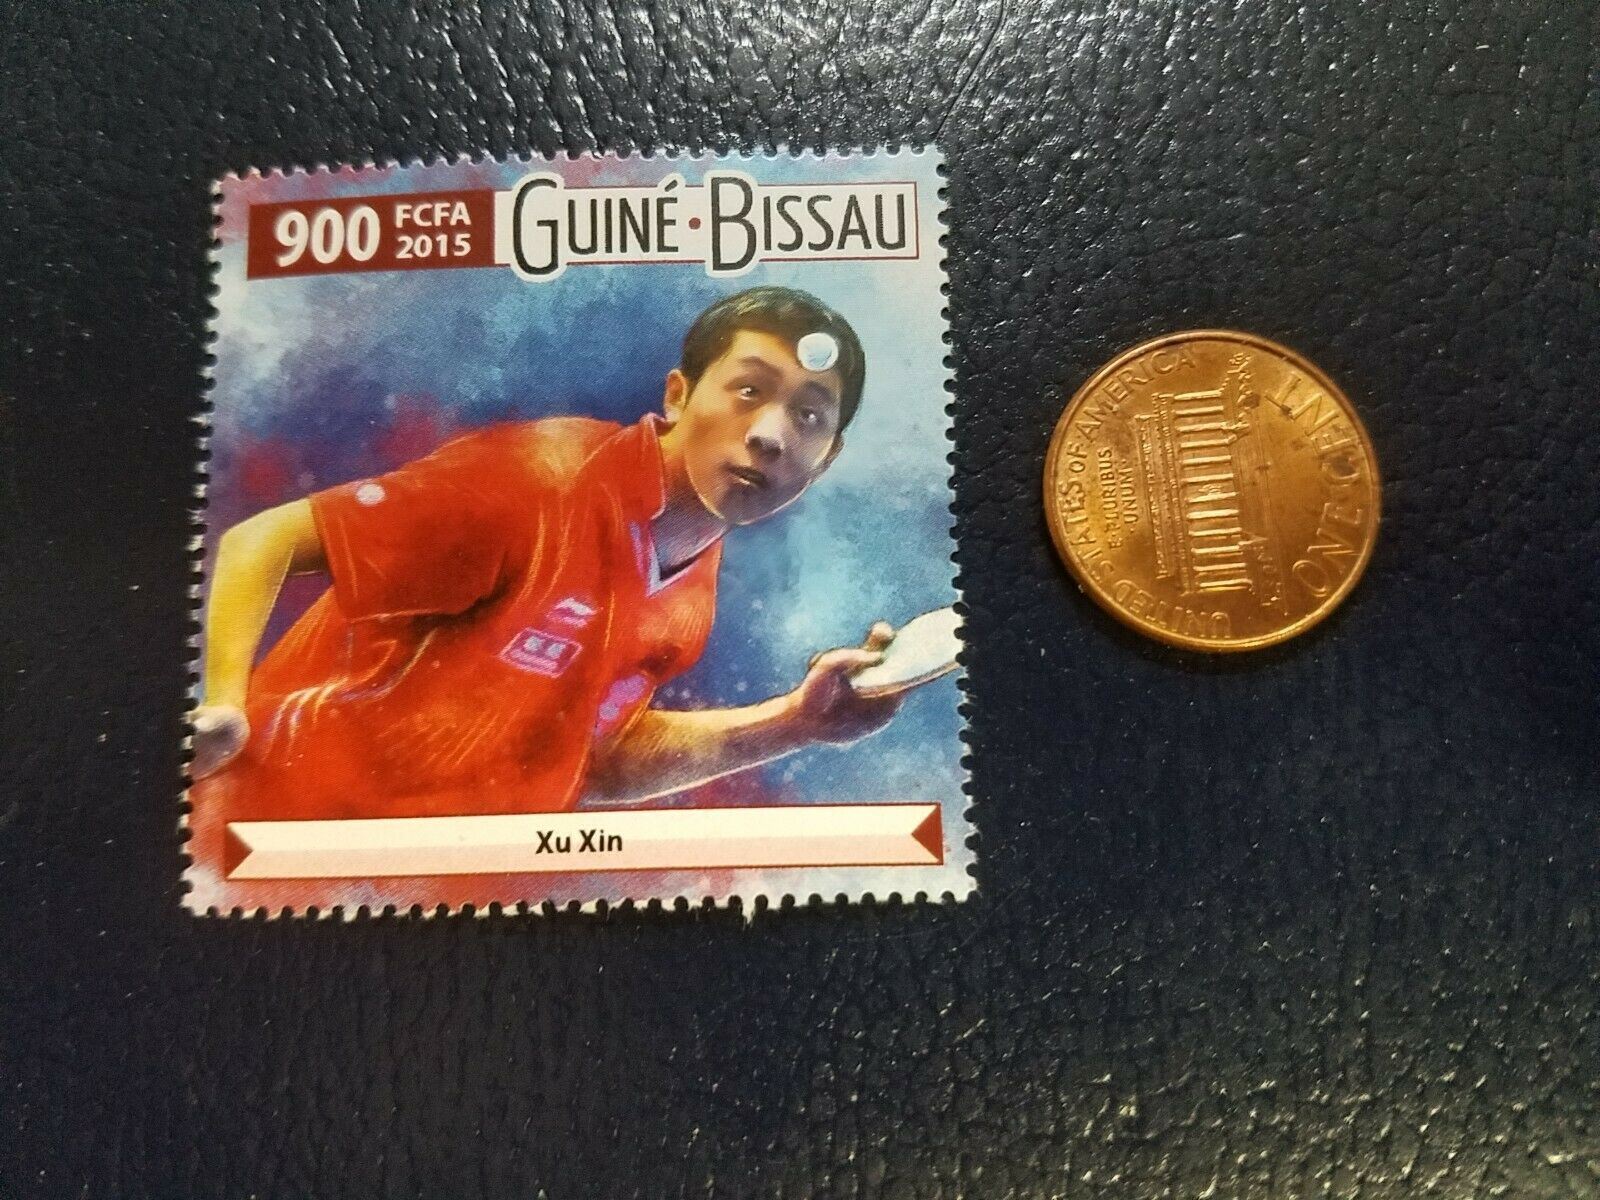 Xu Xin Table Tennis Ping Pong Guine Bissau 2015 Perforated Stamp